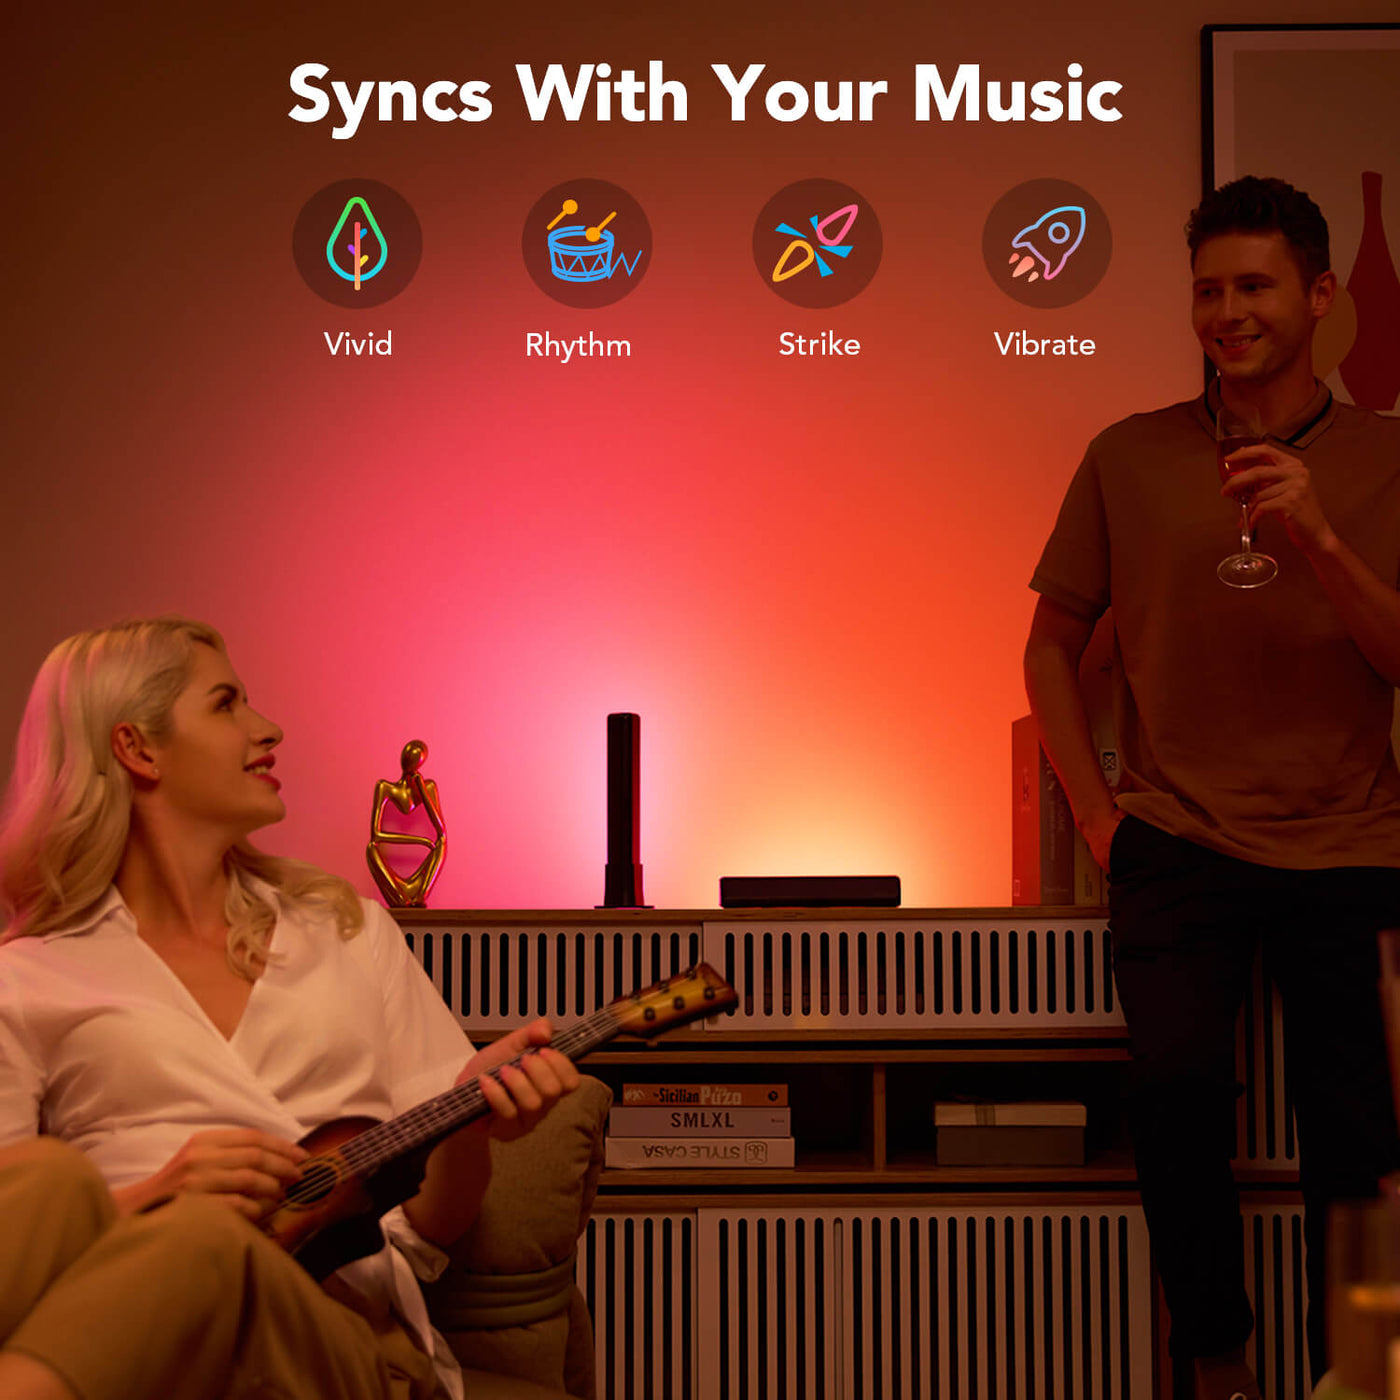 Syncs With Your Music